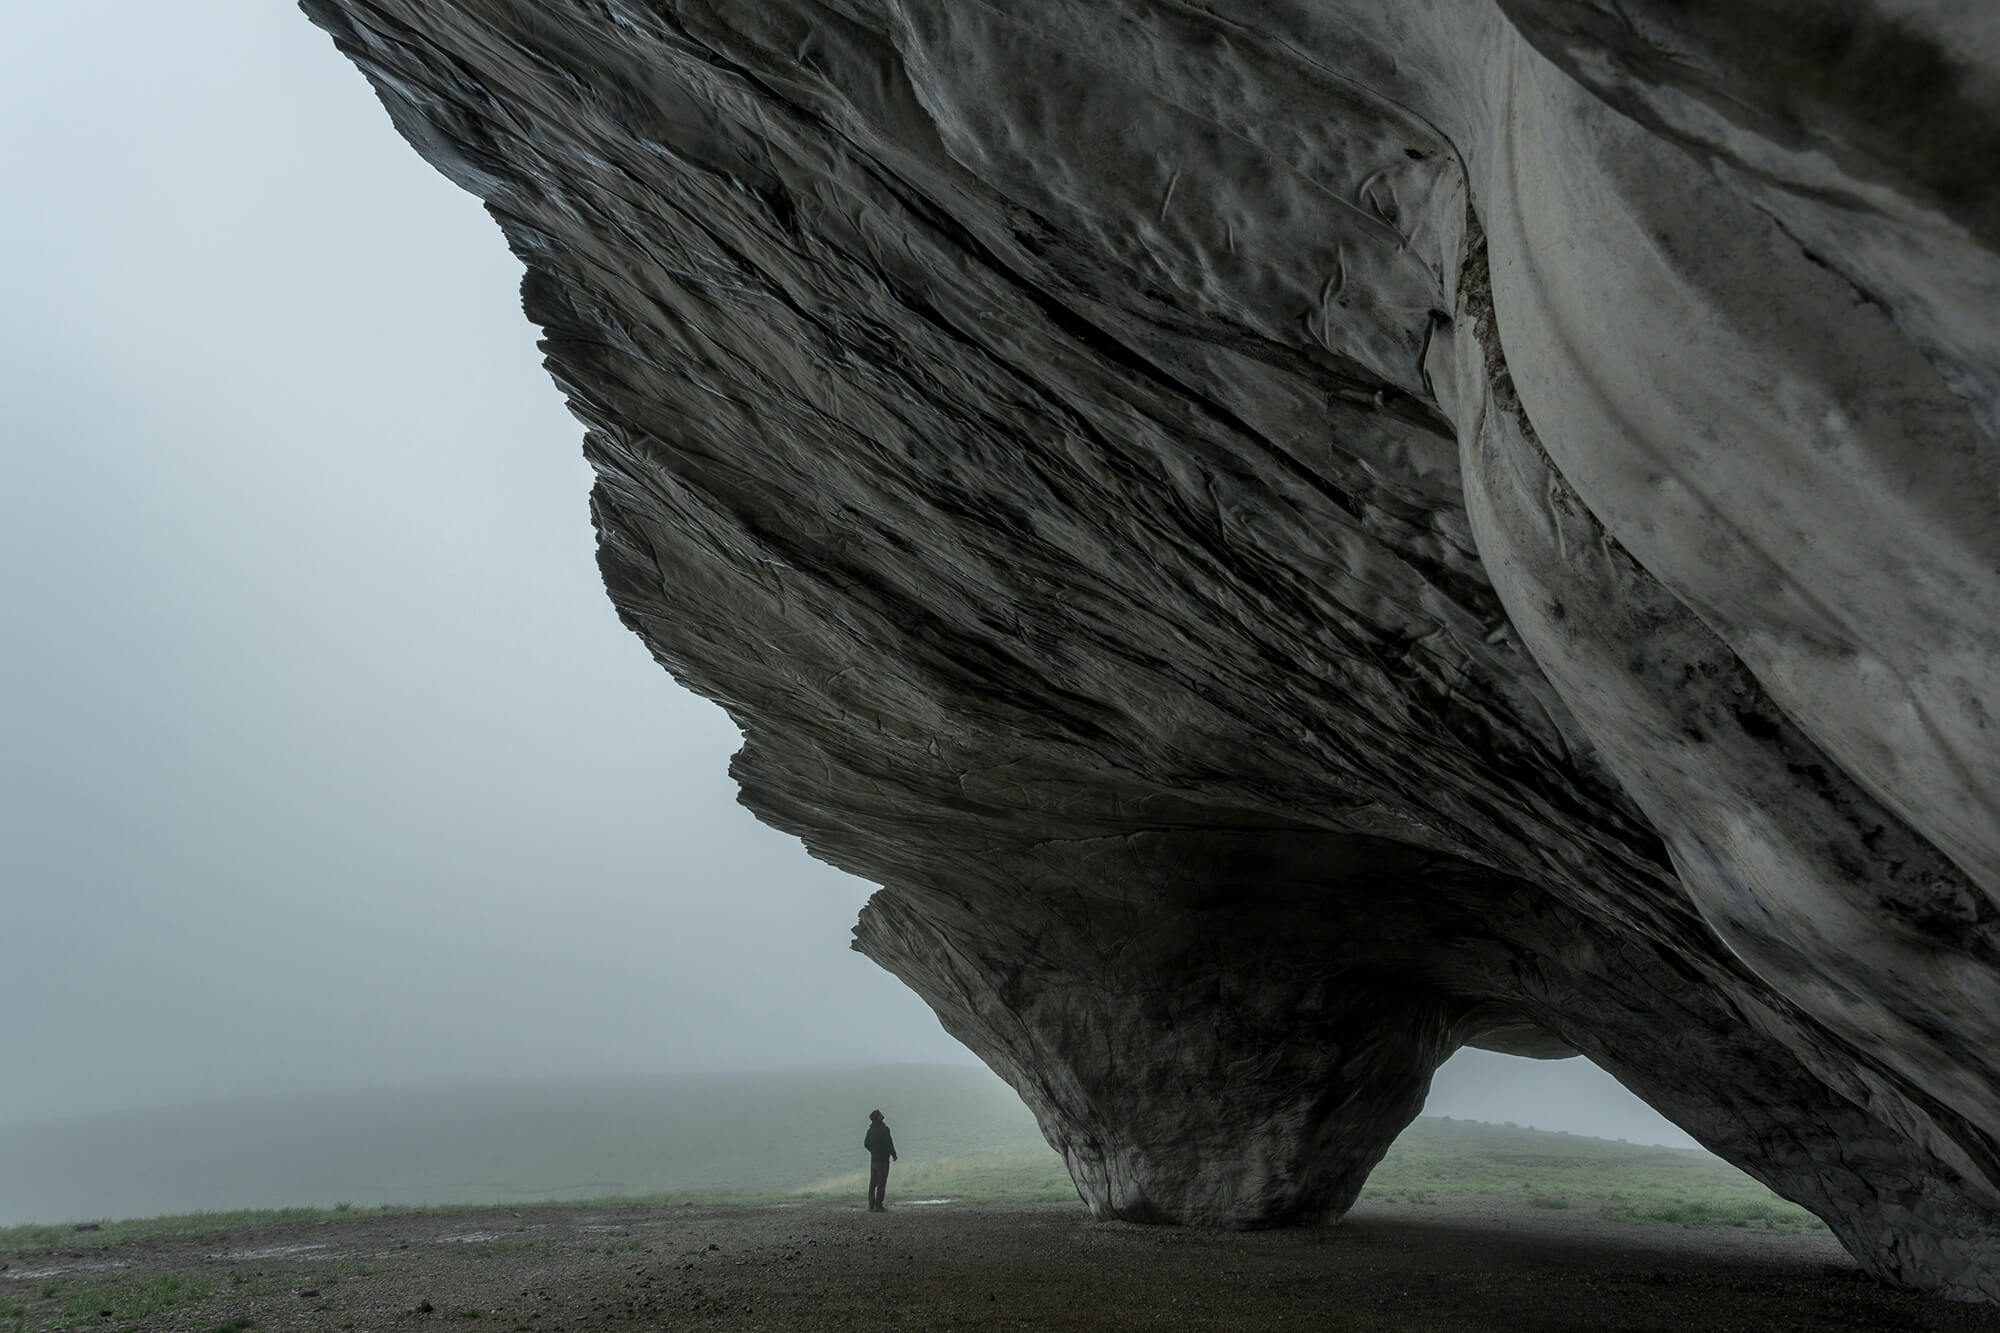 man staring up at a monolithic rock form